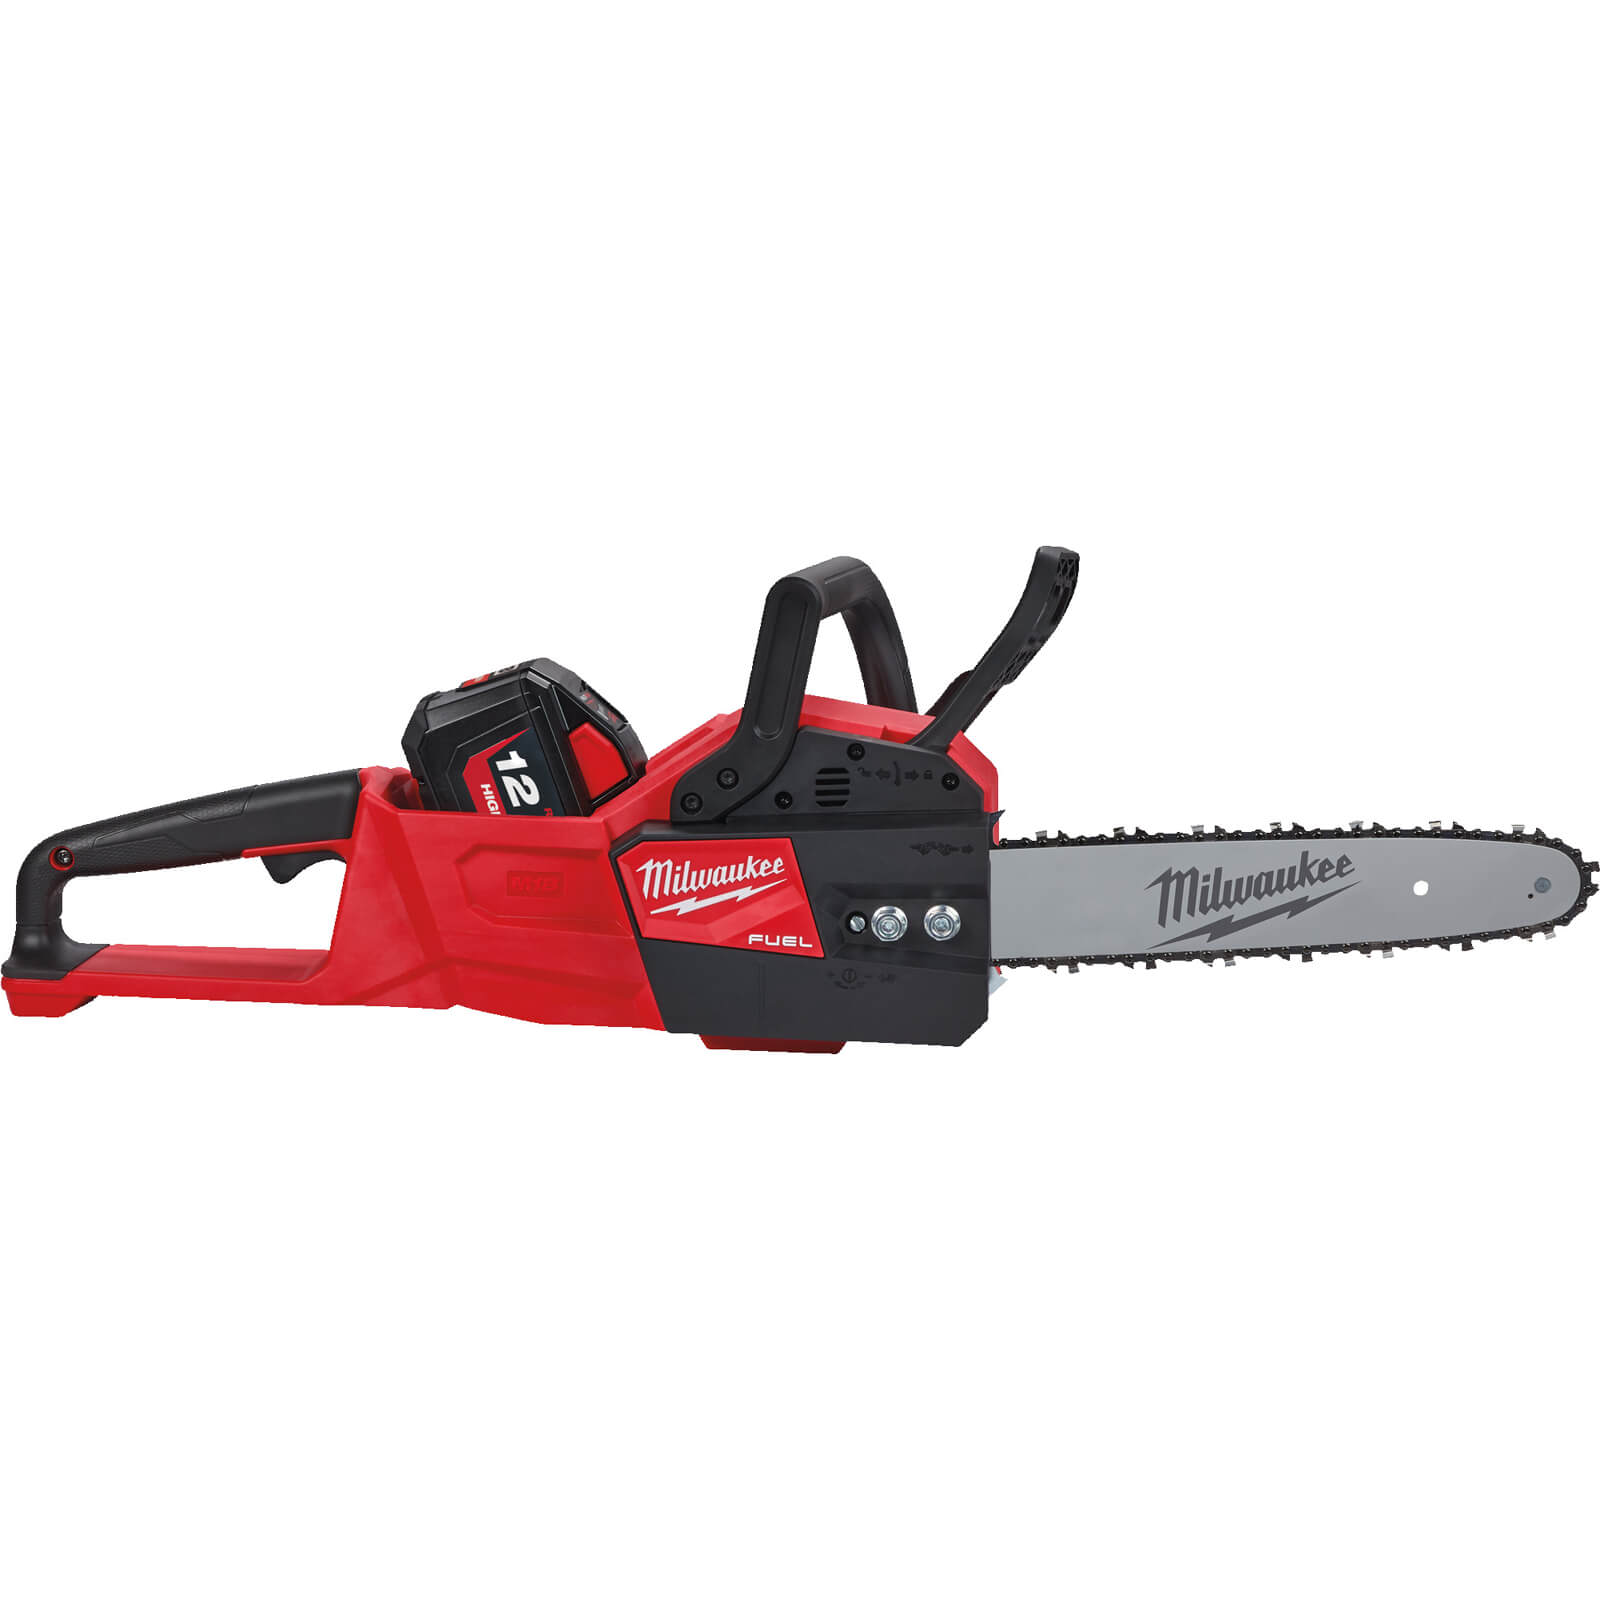 Image of Milwaukee M18 FCHSC Fuel 18v Cordless Brushless Chainsaw 300mm 1 x 12ah Li-ion Charger